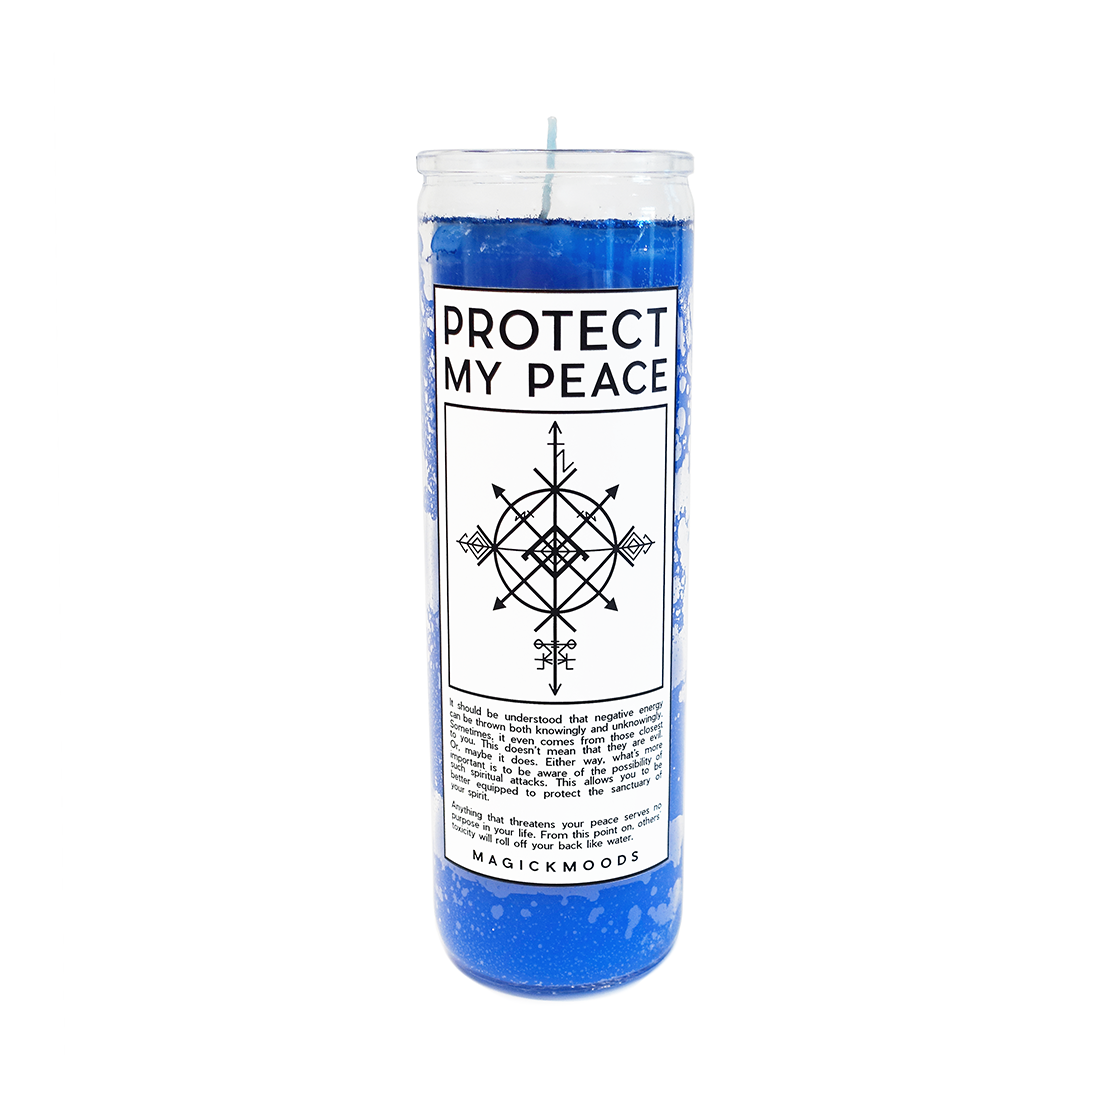 Protect My Peace 7-Day Meditation Candle - PREORDER - Ships by Feb 26th, 2024